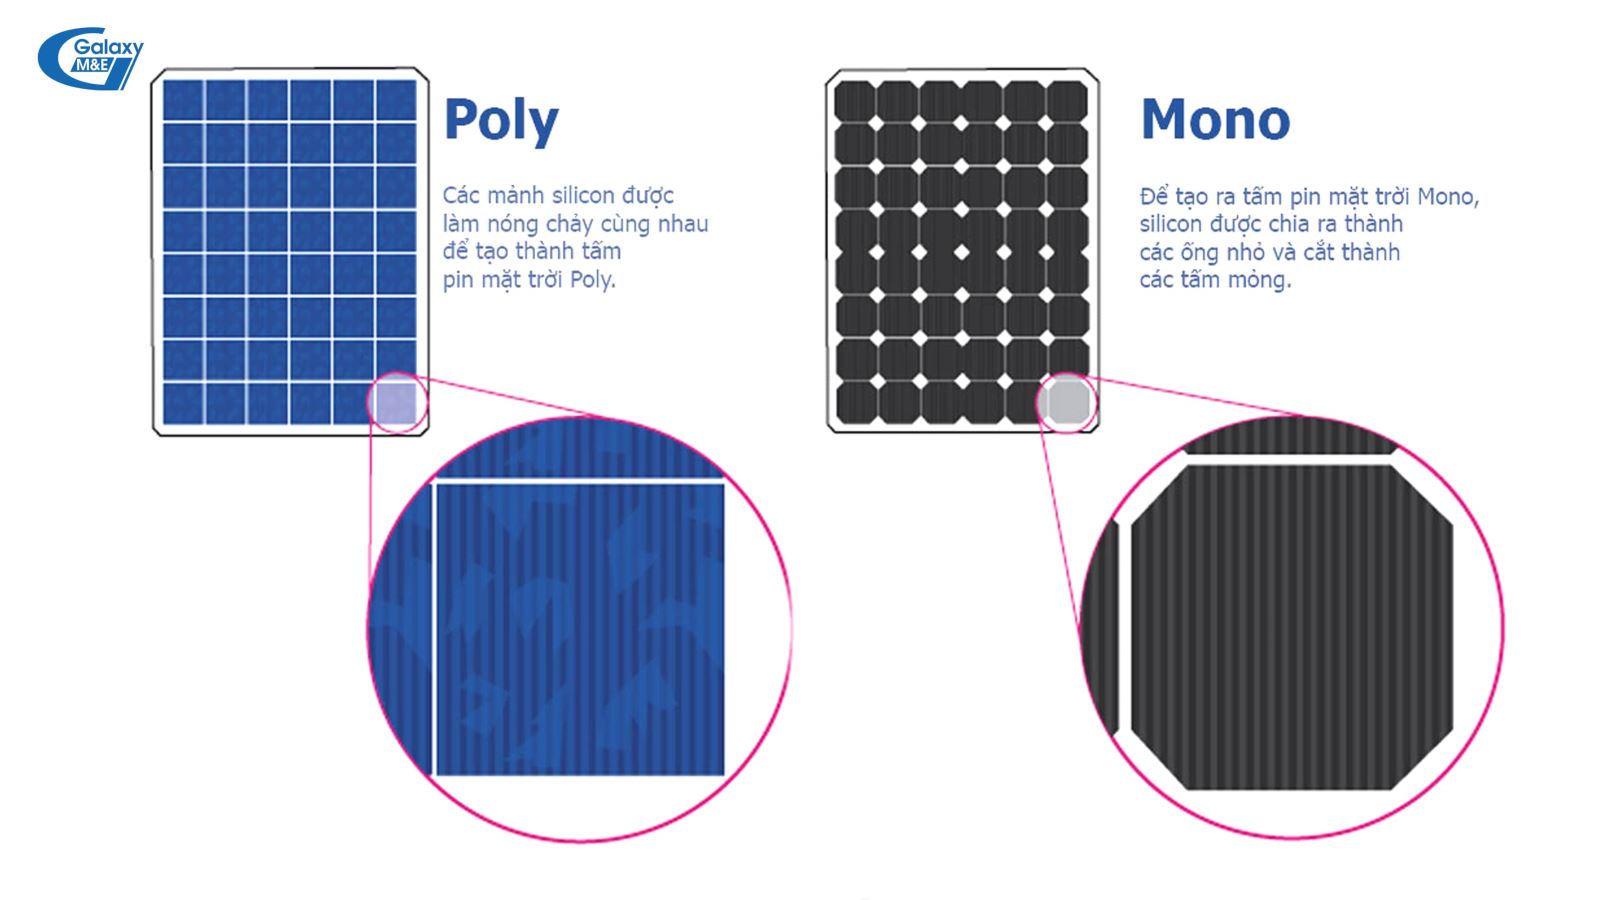 The capacity (Wp) of each solar panel differs depending on the technology, origin,  brand and manufacturer.